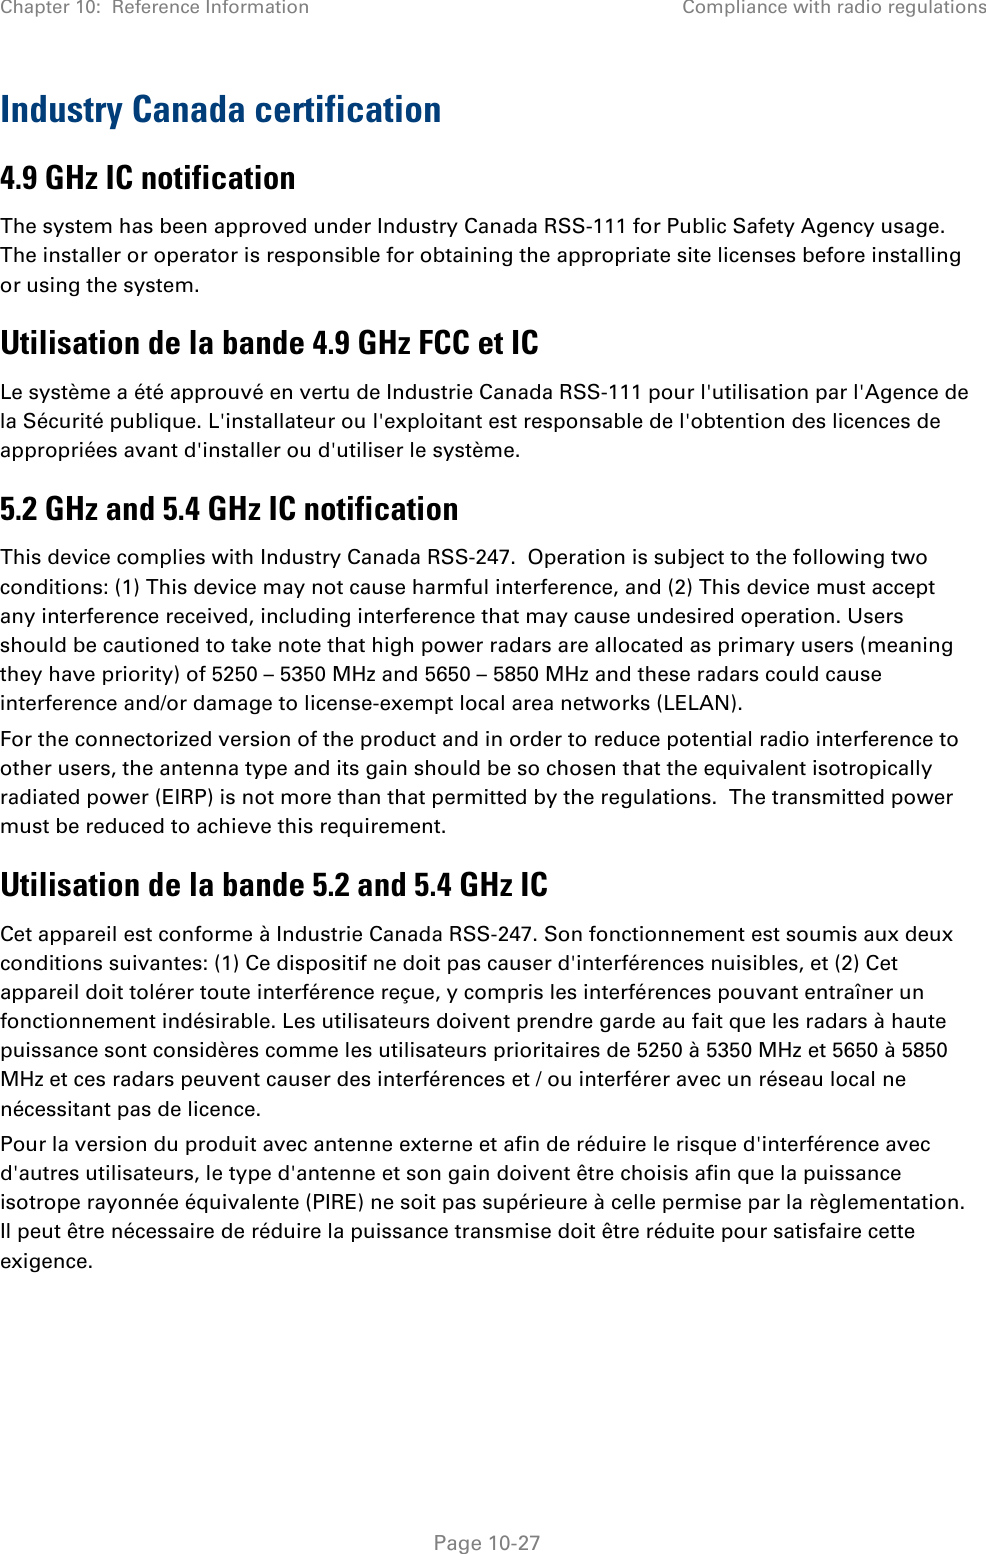 Chapter 10:  Reference Information Compliance with radio regulations   Page 10-27 Industry Canada certification 4.9 GHz IC notification The system has been approved under Industry Canada RSS-111 for Public Safety Agency usage. The installer or operator is responsible for obtaining the appropriate site licenses before installing or using the system. Utilisation de la bande 4.9 GHz FCC et IC Le système a été approuvé en vertu de Industrie Canada RSS-111 pour l&apos;utilisation par l&apos;Agence de la Sécurité publique. L&apos;installateur ou l&apos;exploitant est responsable de l&apos;obtention des licences de appropriées avant d&apos;installer ou d&apos;utiliser le système. 5.2 GHz and 5.4 GHz IC notification This device complies with Industry Canada RSS-247.  Operation is subject to the following two conditions: (1) This device may not cause harmful interference, and (2) This device must accept any interference received, including interference that may cause undesired operation. Users should be cautioned to take note that high power radars are allocated as primary users (meaning they have priority) of 5250 – 5350 MHz and 5650 – 5850 MHz and these radars could cause interference and/or damage to license-exempt local area networks (LELAN). For the connectorized version of the product and in order to reduce potential radio interference to other users, the antenna type and its gain should be so chosen that the equivalent isotropically radiated power (EIRP) is not more than that permitted by the regulations.  The transmitted power must be reduced to achieve this requirement. Utilisation de la bande 5.2 and 5.4 GHz IC Cet appareil est conforme à Industrie Canada RSS-247. Son fonctionnement est soumis aux deux conditions suivantes: (1) Ce dispositif ne doit pas causer d&apos;interférences nuisibles, et (2) Cet appareil doit tolérer toute interférence reçue, y compris les interférences pouvant entraîner un fonctionnement indésirable. Les utilisateurs doivent prendre garde au fait que les radars à haute puissance sont considères comme les utilisateurs prioritaires de 5250 à 5350 MHz et 5650 à 5850 MHz et ces radars peuvent causer des interférences et / ou interférer avec un réseau local ne nécessitant pas de licence.  Pour la version du produit avec antenne externe et afin de réduire le risque d&apos;interférence avec d&apos;autres utilisateurs, le type d&apos;antenne et son gain doivent être choisis afin que la puissance isotrope rayonnée équivalente (PIRE) ne soit pas supérieure à celle permise par la règlementation. Il peut être nécessaire de réduire la puissance transmise doit être réduite pour satisfaire cette exigence. 